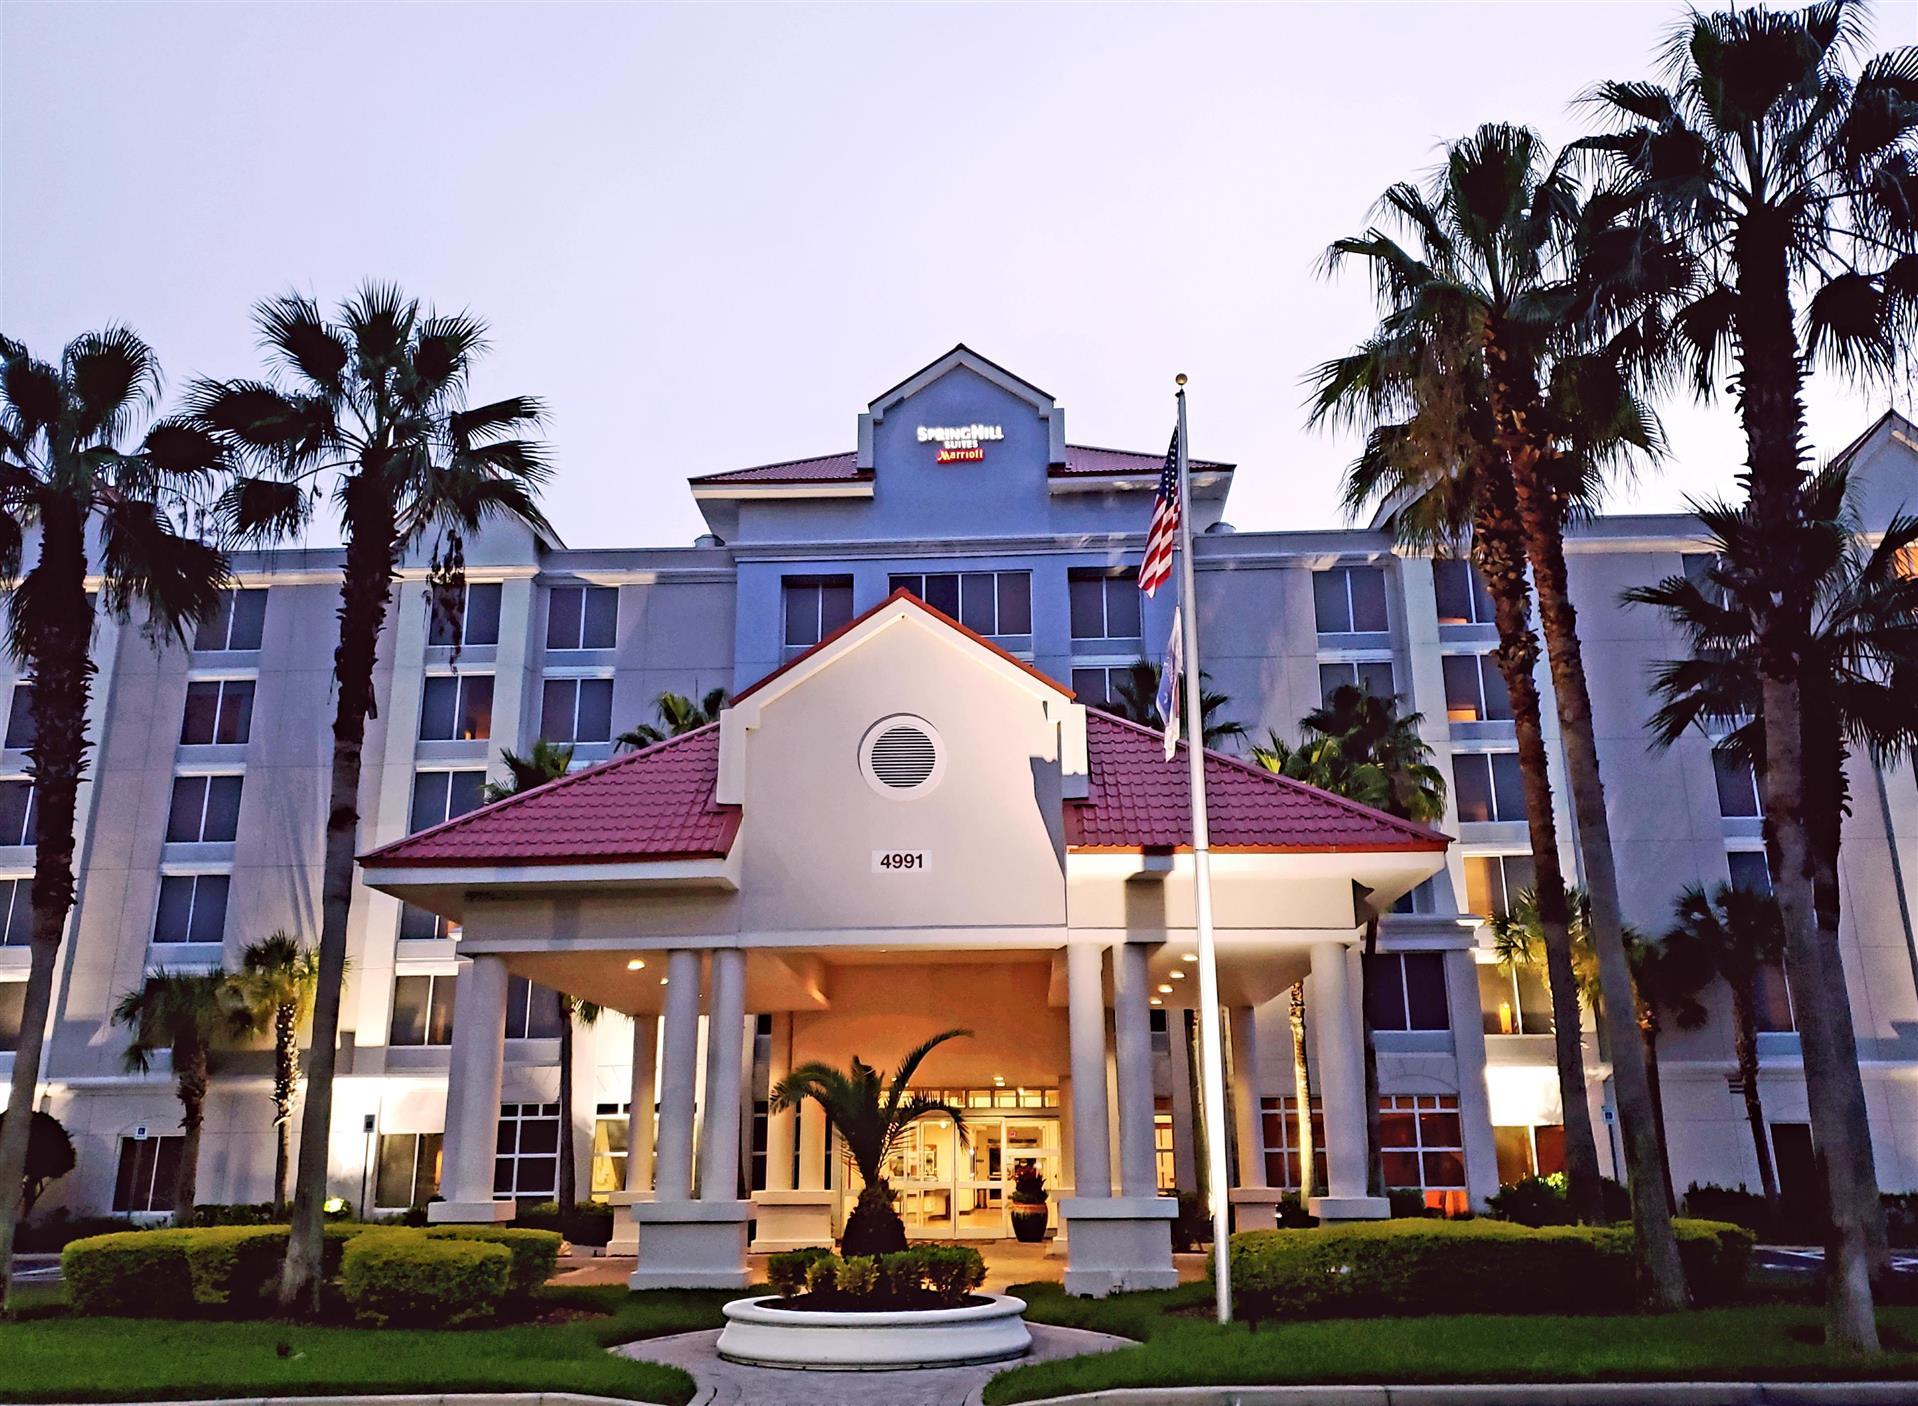 SpringHill Suites Orlando Lake Buena Vista South in Kissimmee, FL